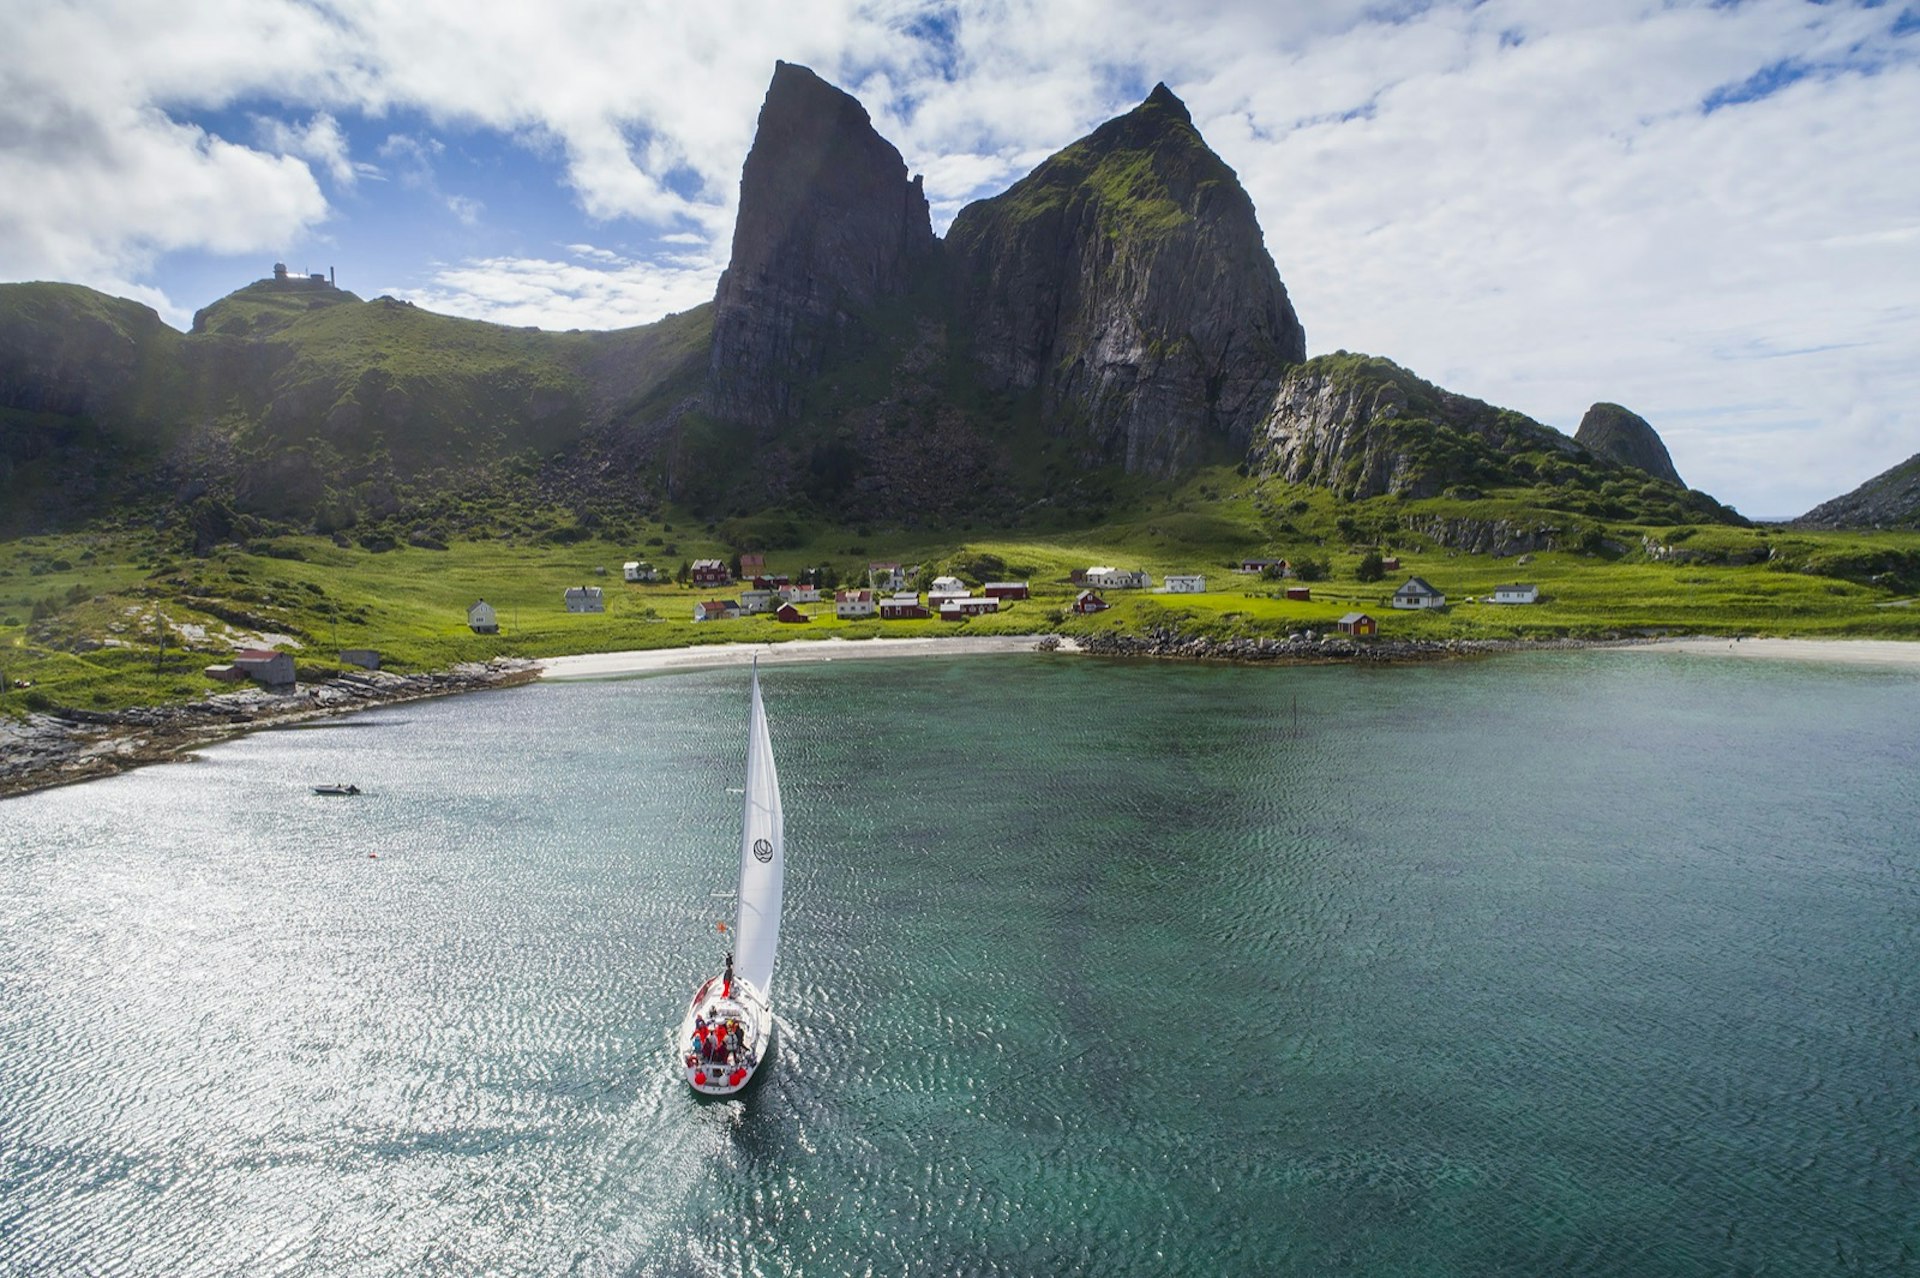 A sail boat heads towards a green shore line with two giant rock mountains in the background